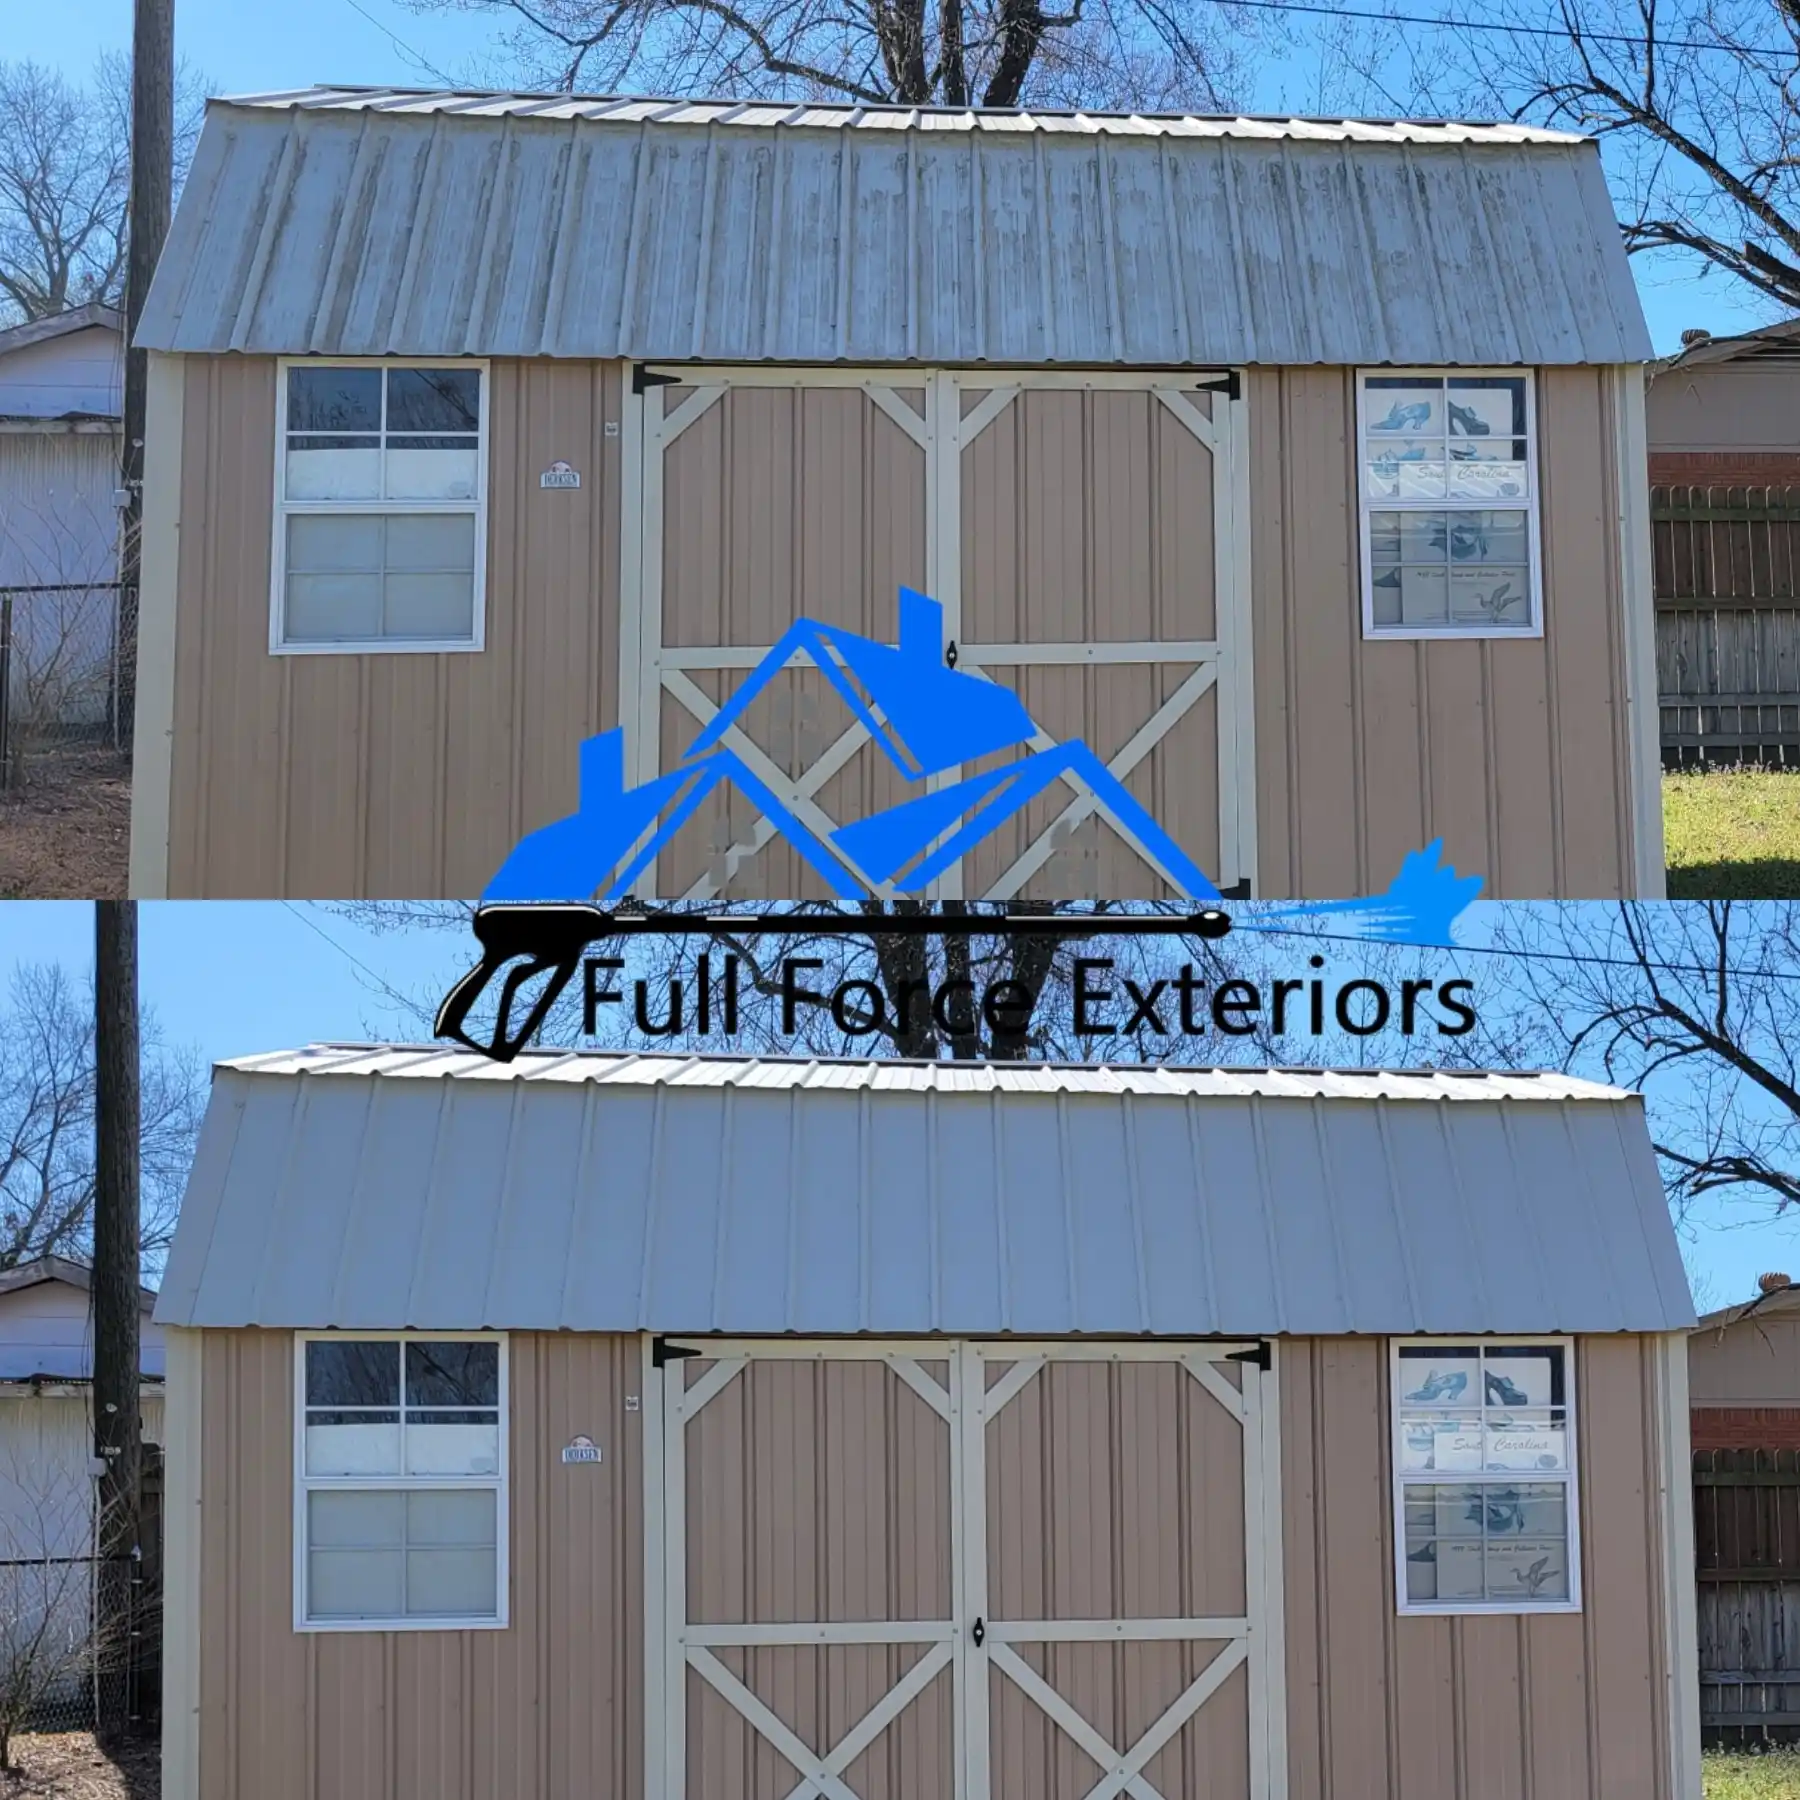 Home Softwash for Full Force Exteriors in Russellville, AR